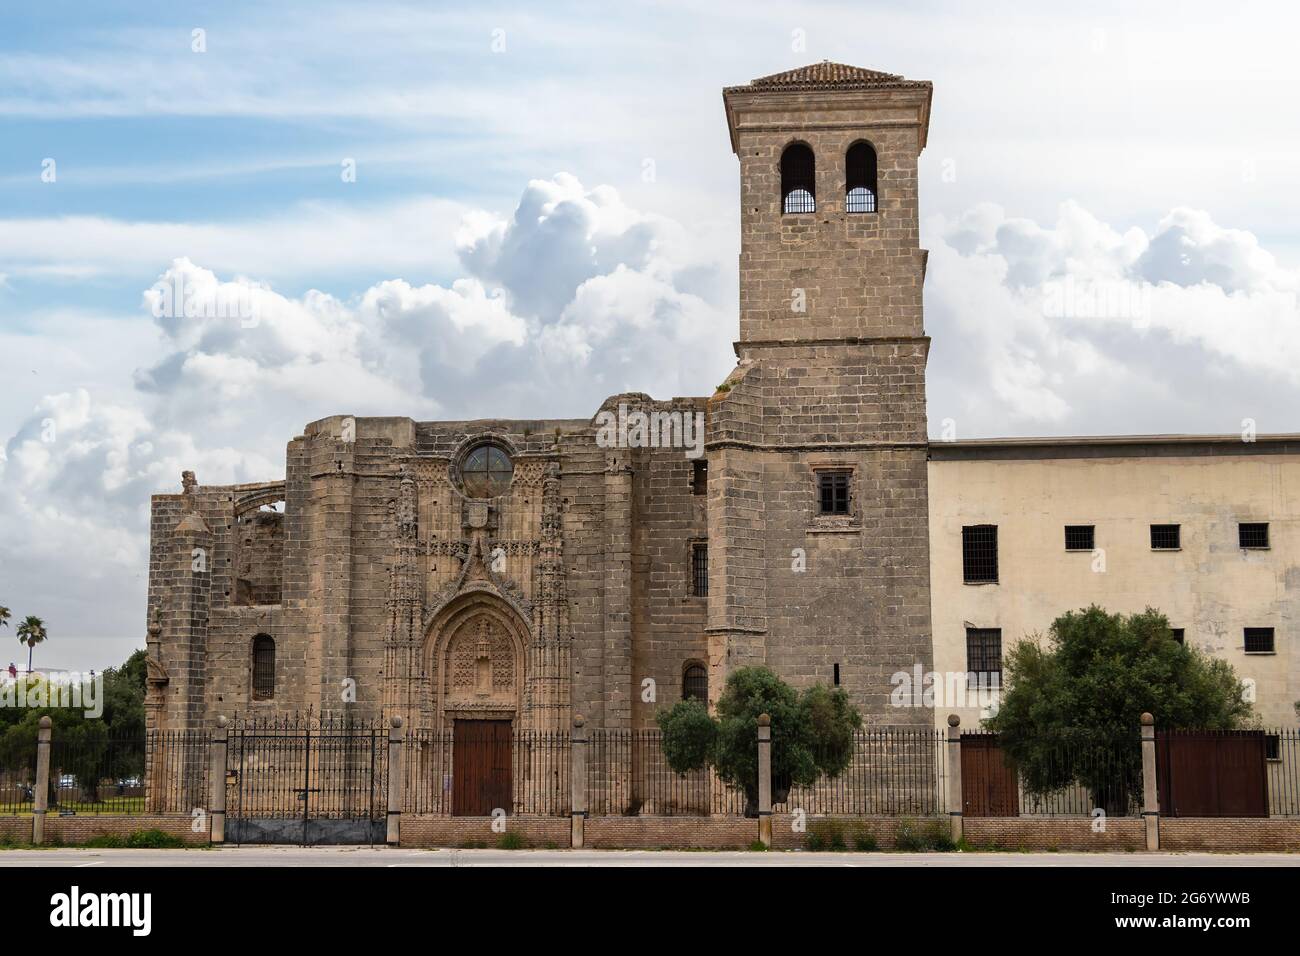 The monastery of La Victoria is a former convent in the Spanish town El Puerto de Santa María, erected in the early 16th century by the lords of the t Stock Photo